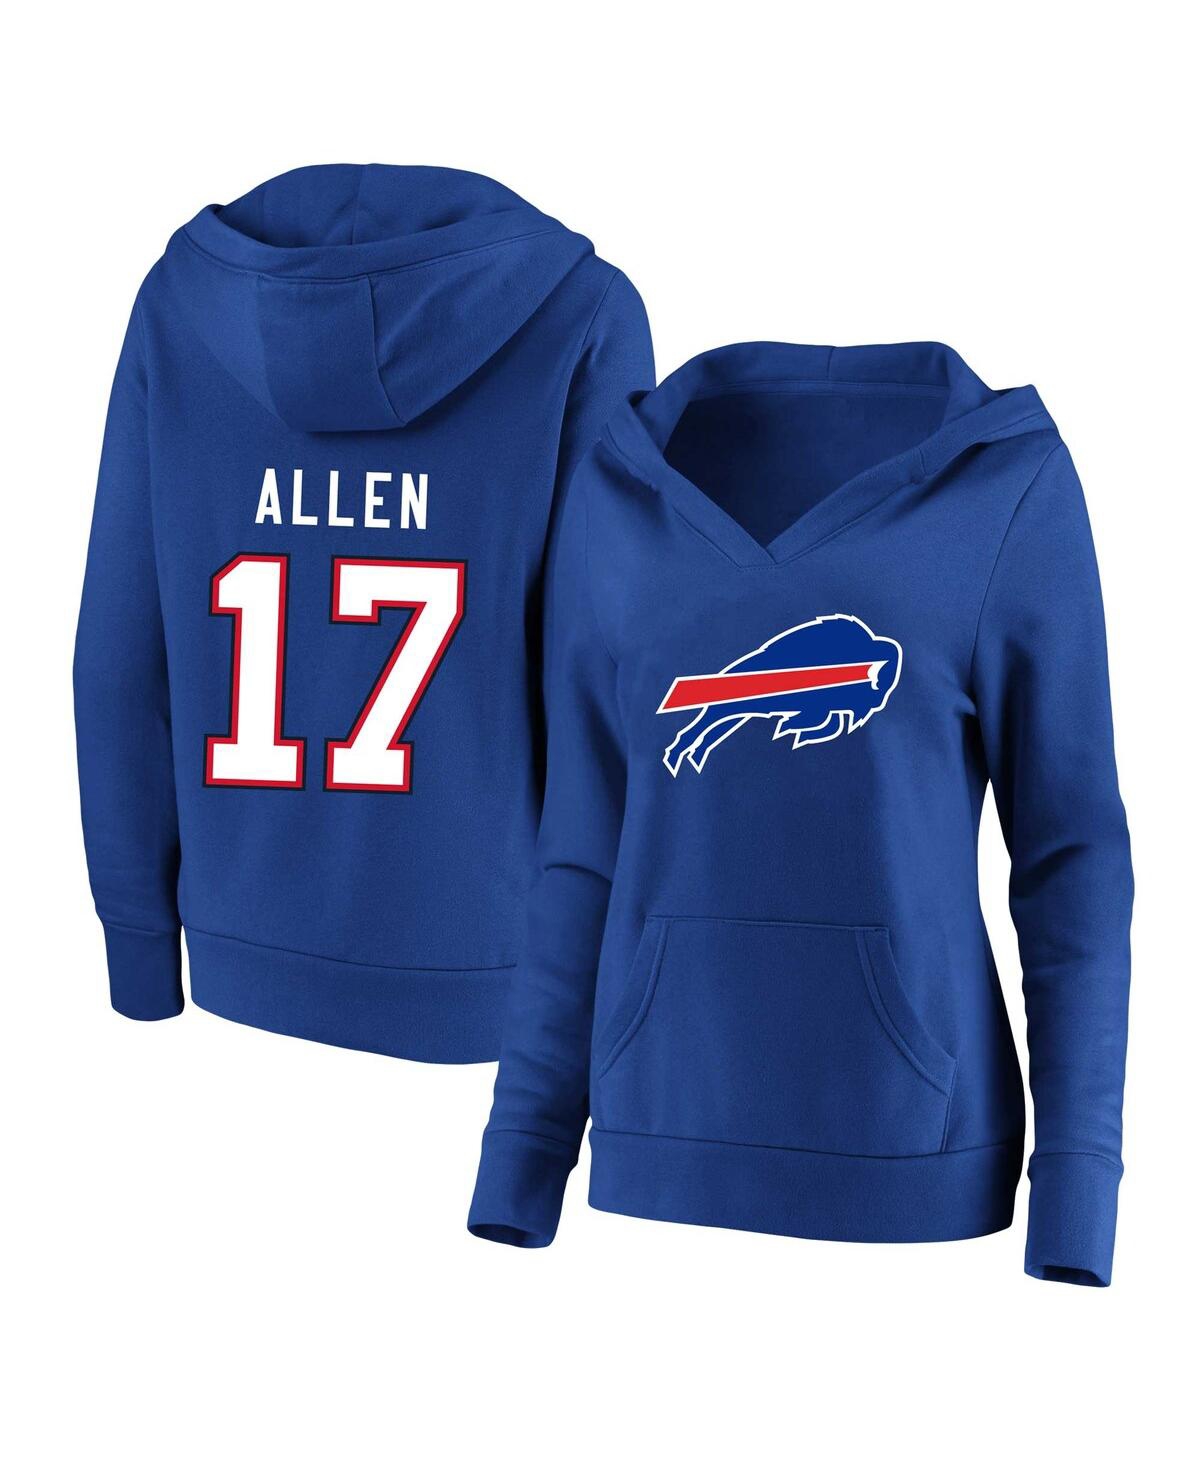 Women's Profile Josh Allen Royal Buffalo Bills Plus Size Player Name and Number Pullover Hoodie - Royal